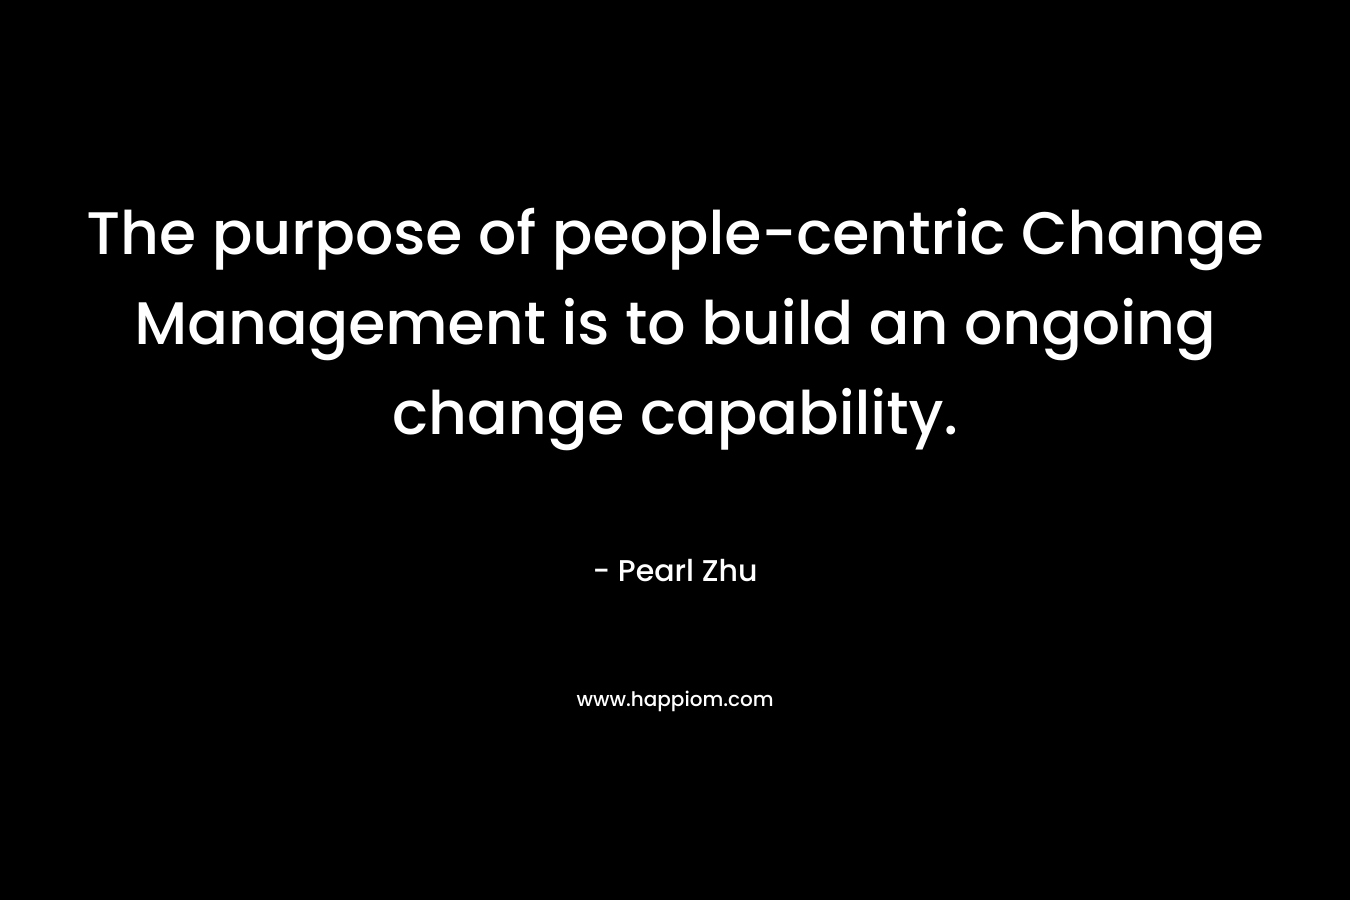 The purpose of people-centric Change Management is to build an ongoing change capability.